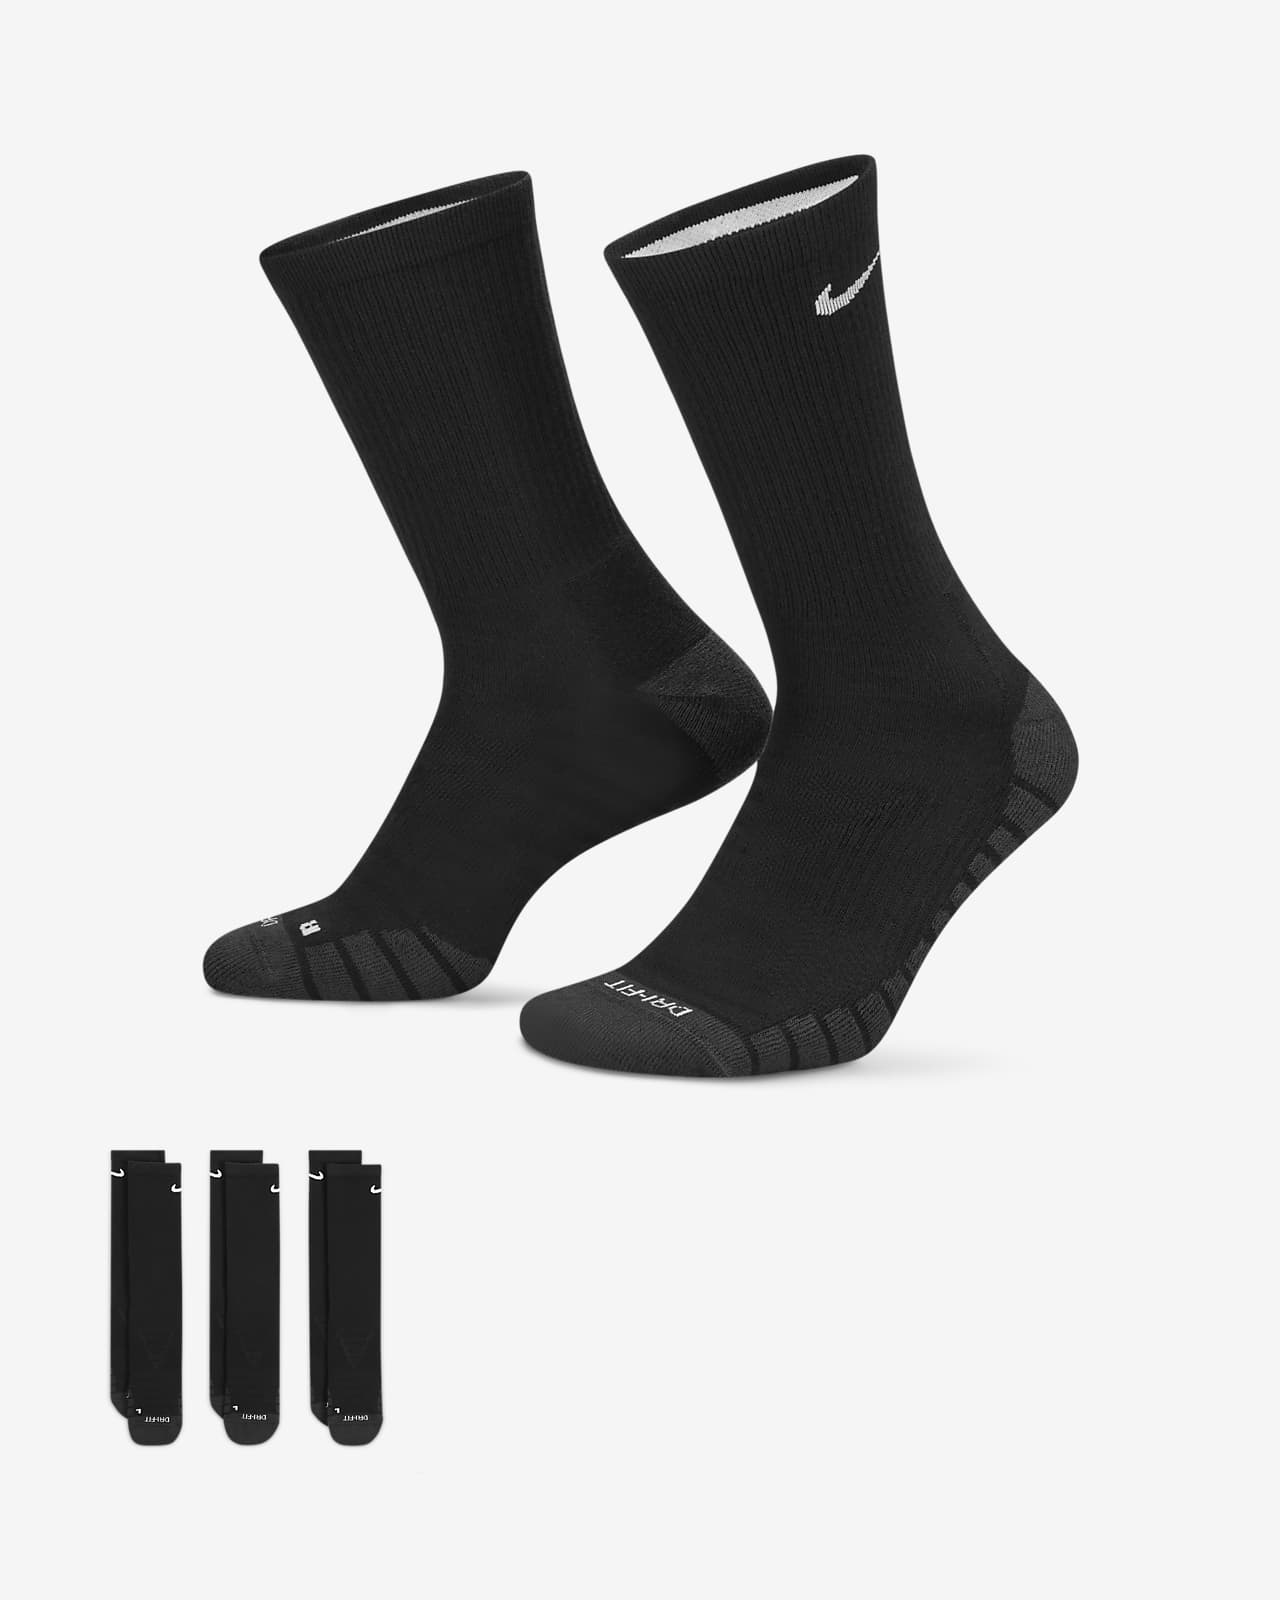 Chaussettes de training mi-mollet Nike Everyday Max Cushioned (3 paires)